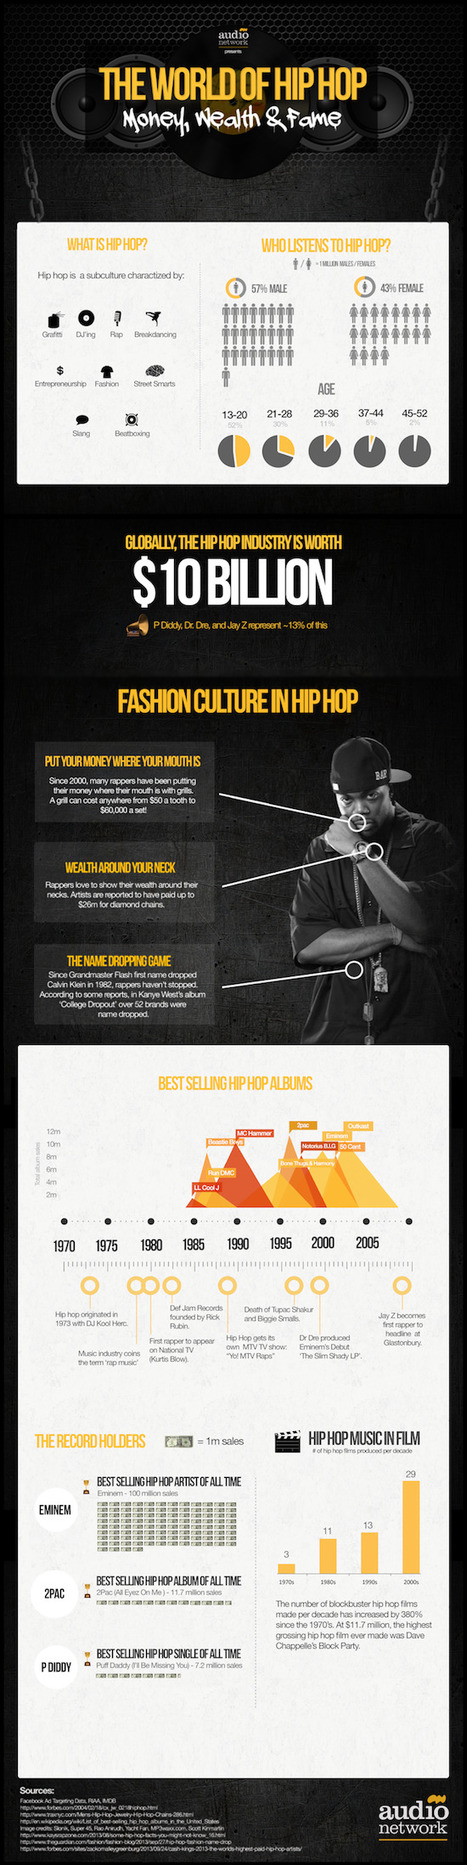 The World of Hip Hop Infographic | G-Tips: Social Media & Marketing | Scoop.it